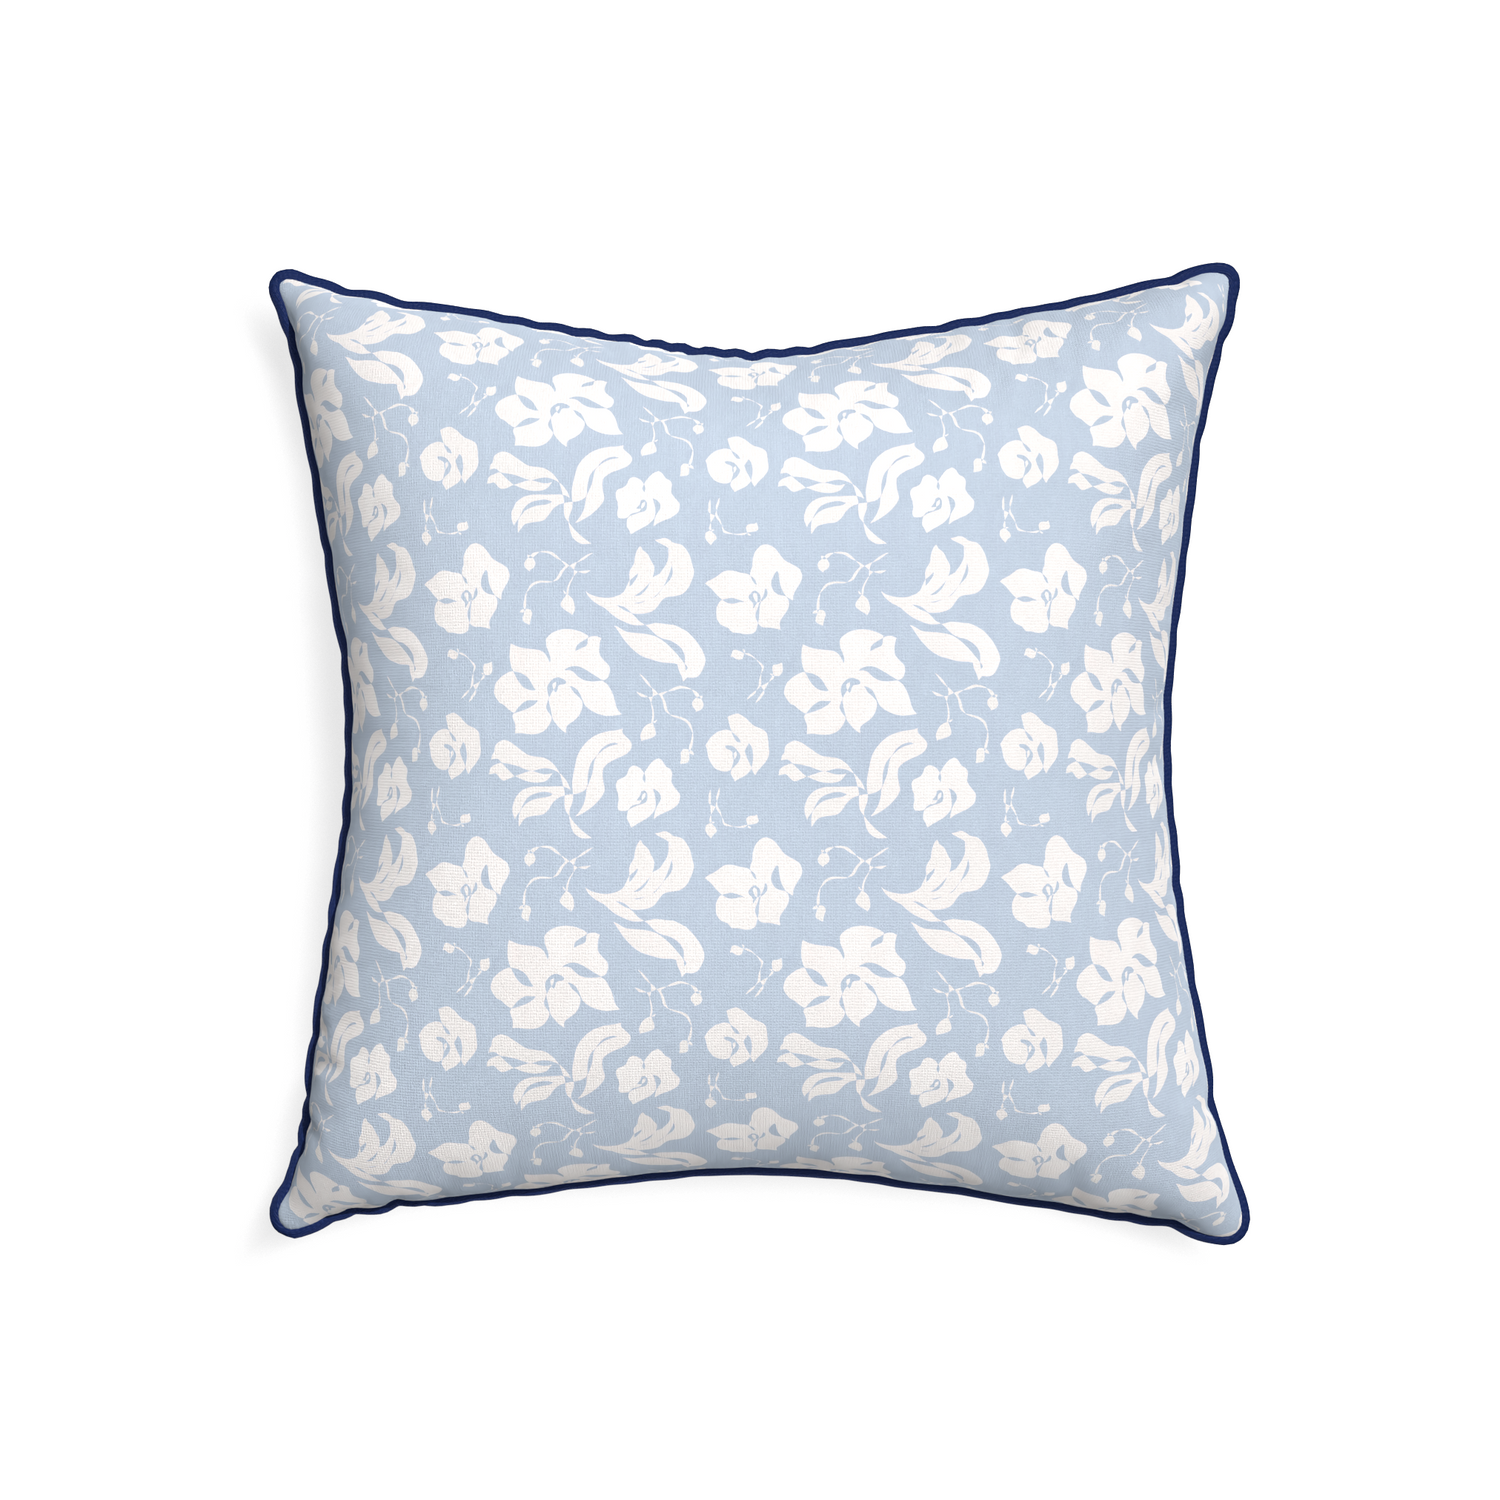 22-square georgia custom pillow with midnight piping on white background